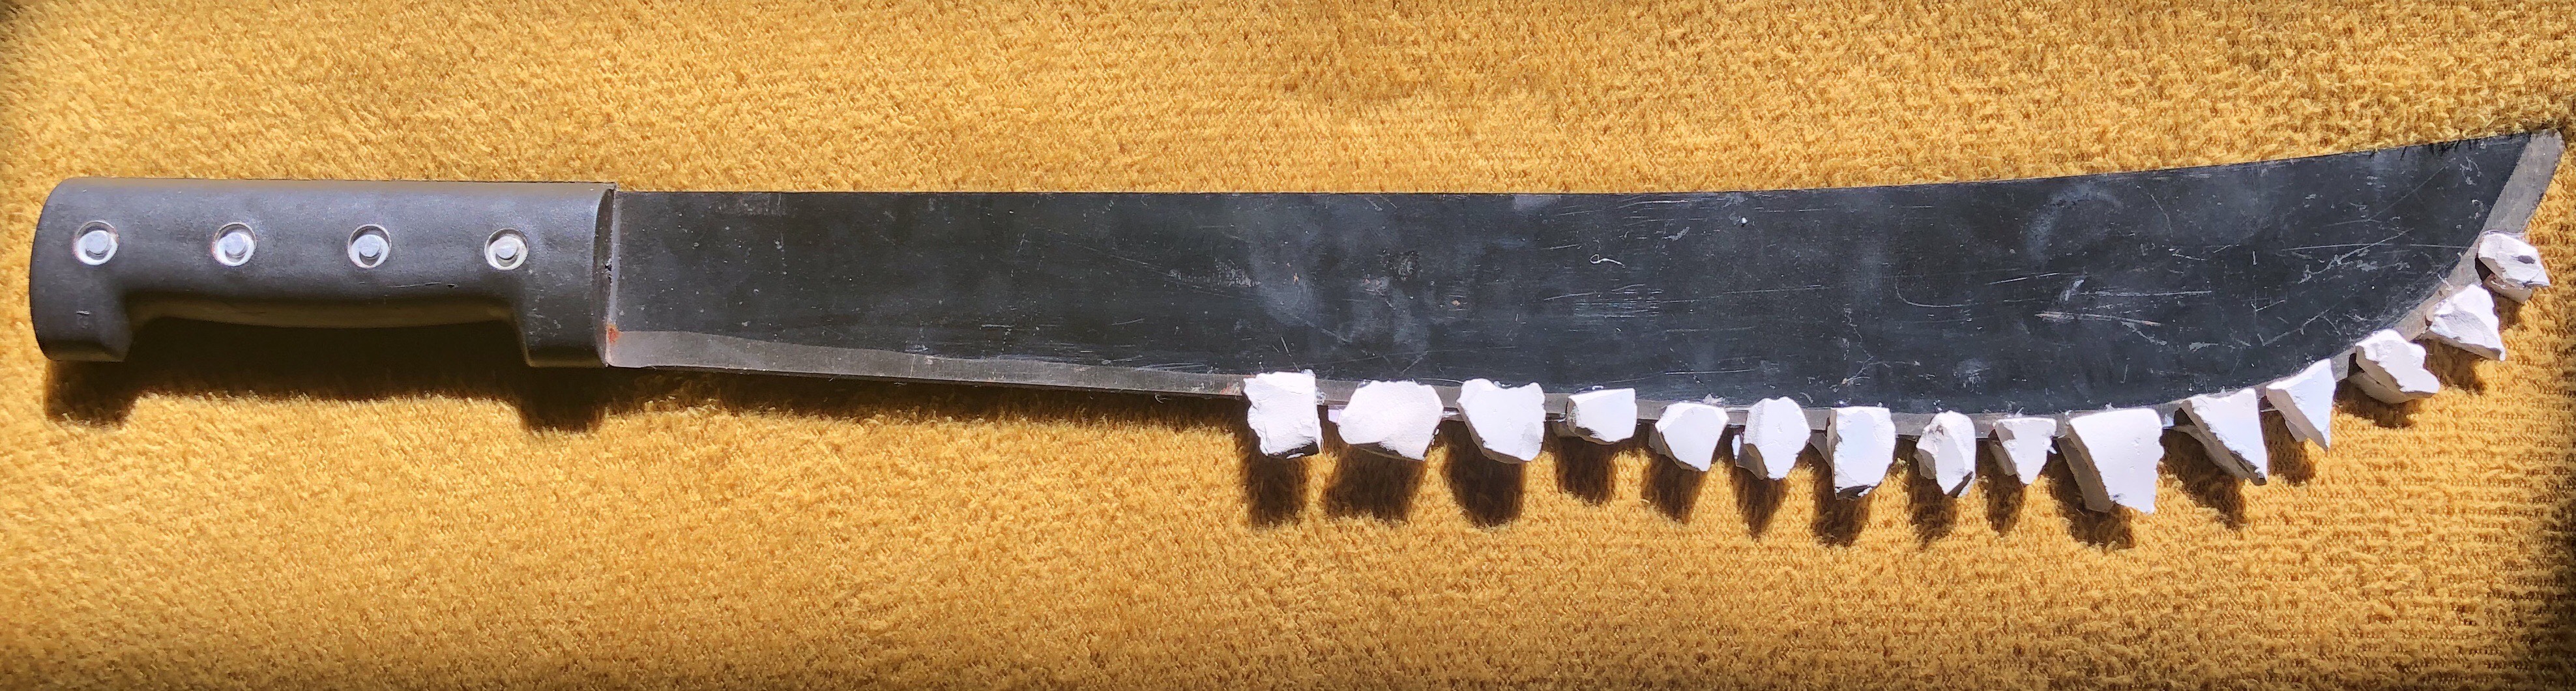 A Machete with teeth on the blade